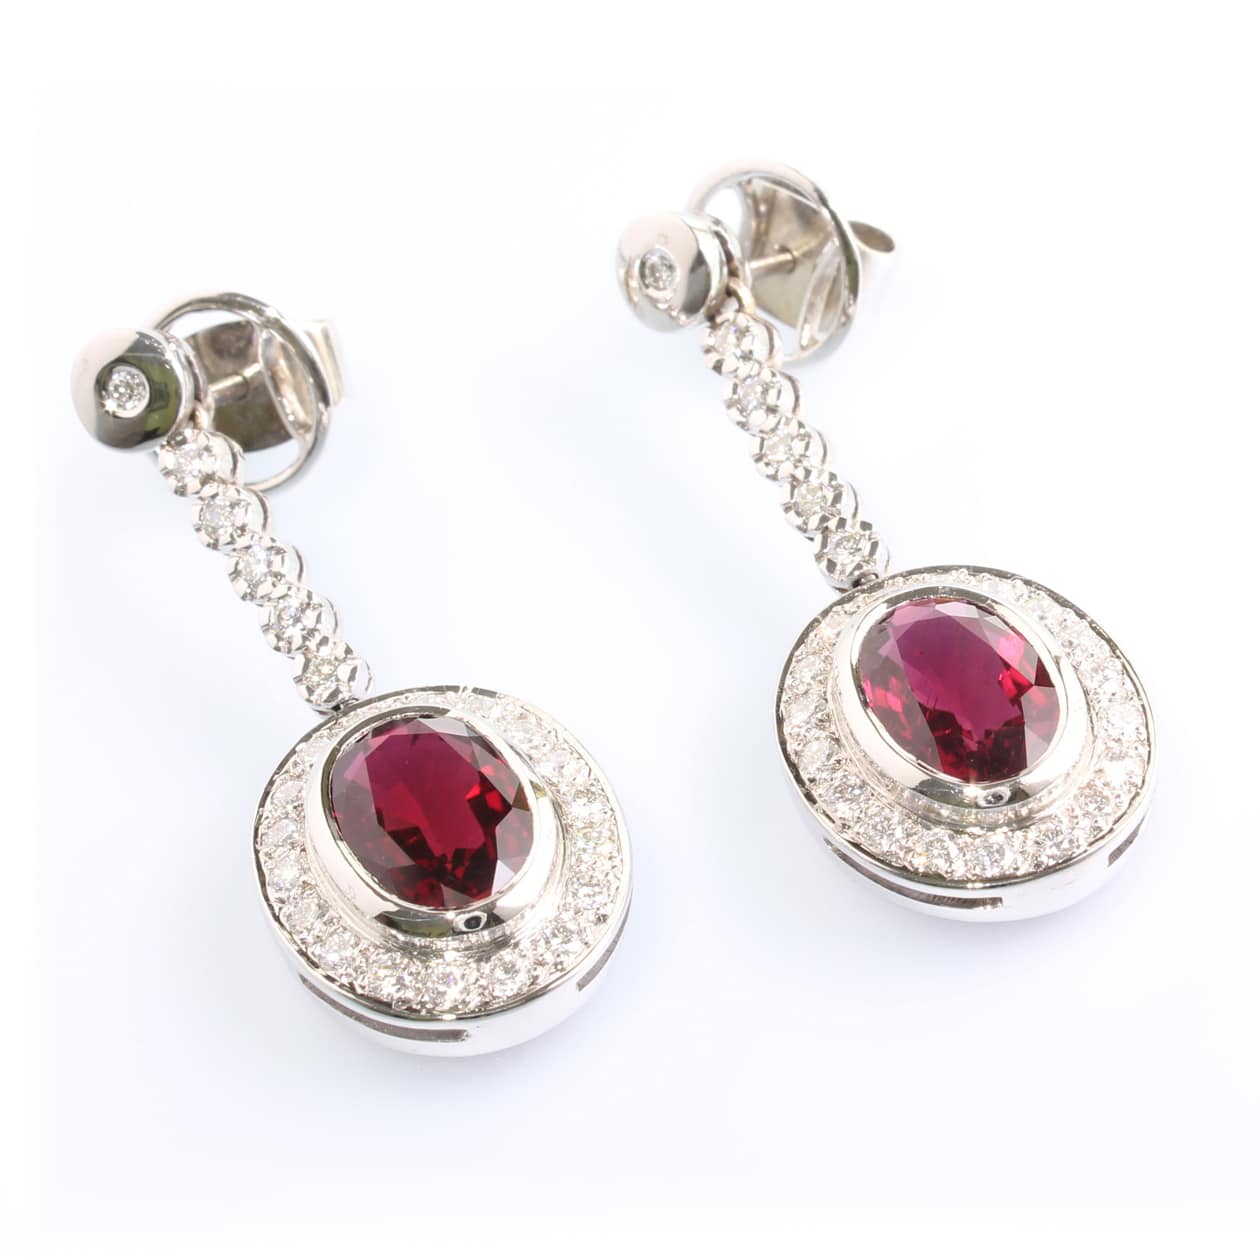 Earrings with rubellite tourmaline and diamonds in 18K white gold; handmade.  Exclusive piece.